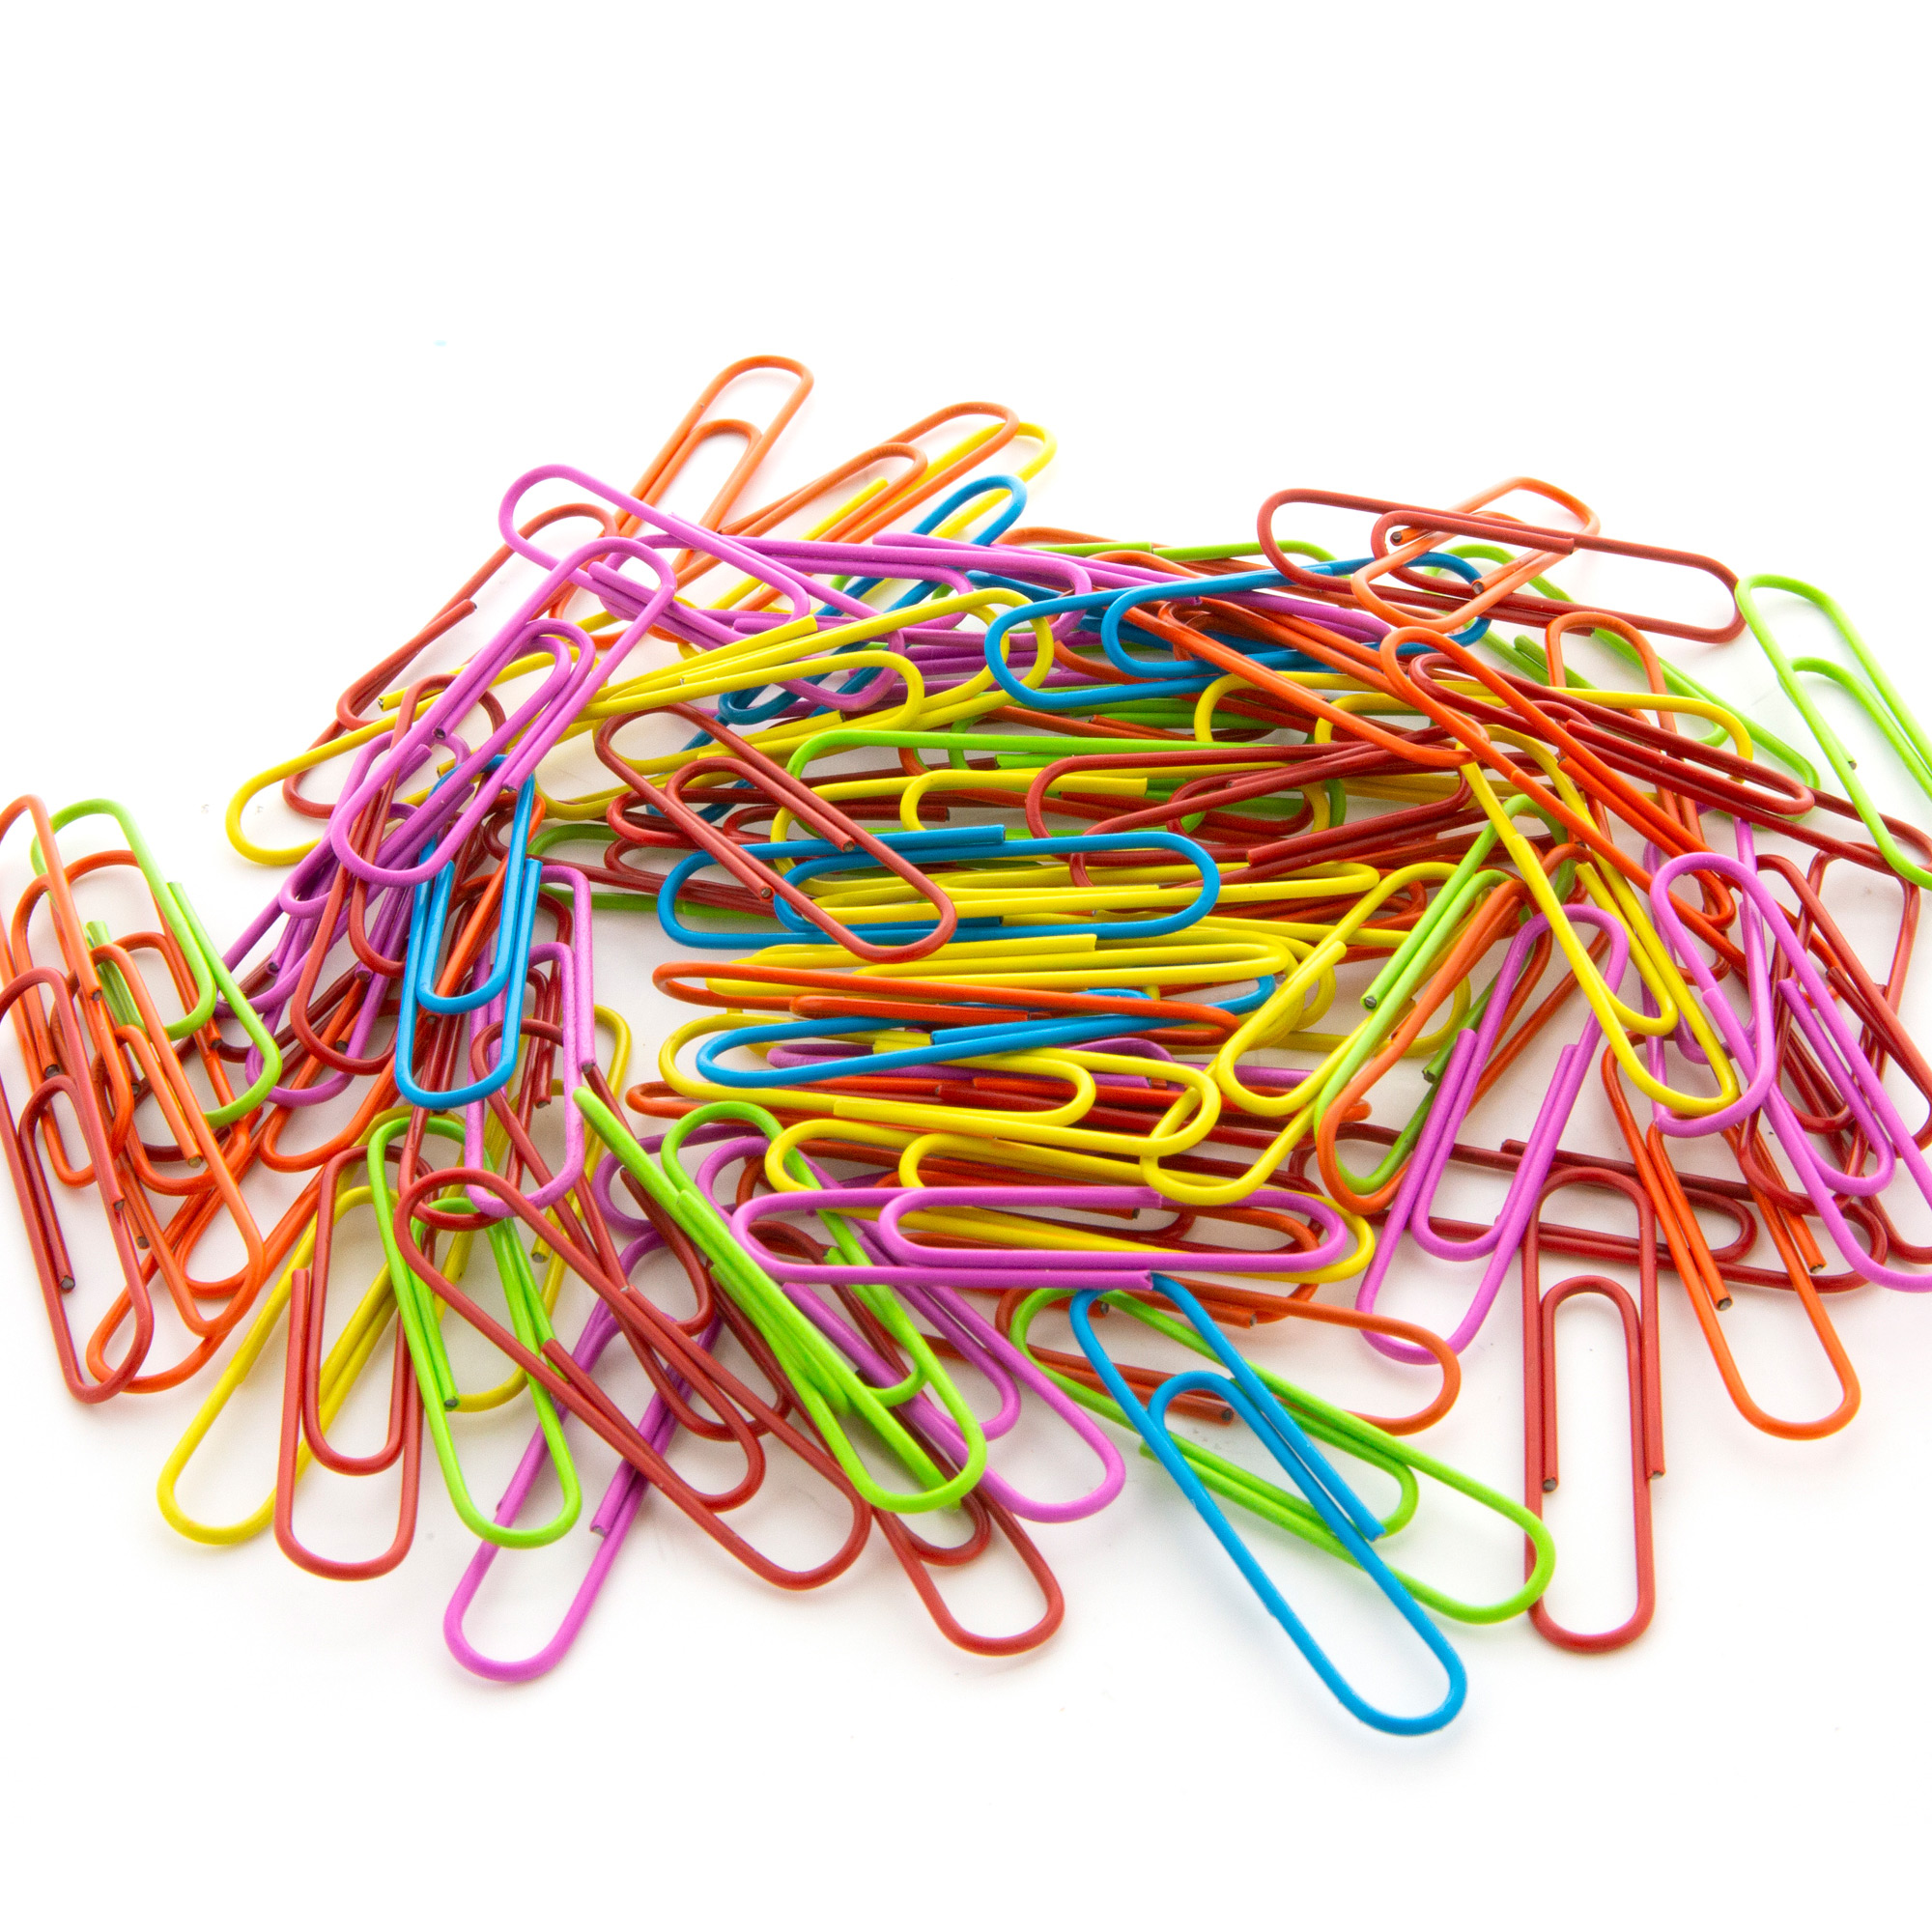 Jumbo 50mm 500 + 150 Bonus Assorted Office Clips for School Medium 33mm & Small 28mm Work or Organizing Daily Needs 650 Pieces Colored Paperclips